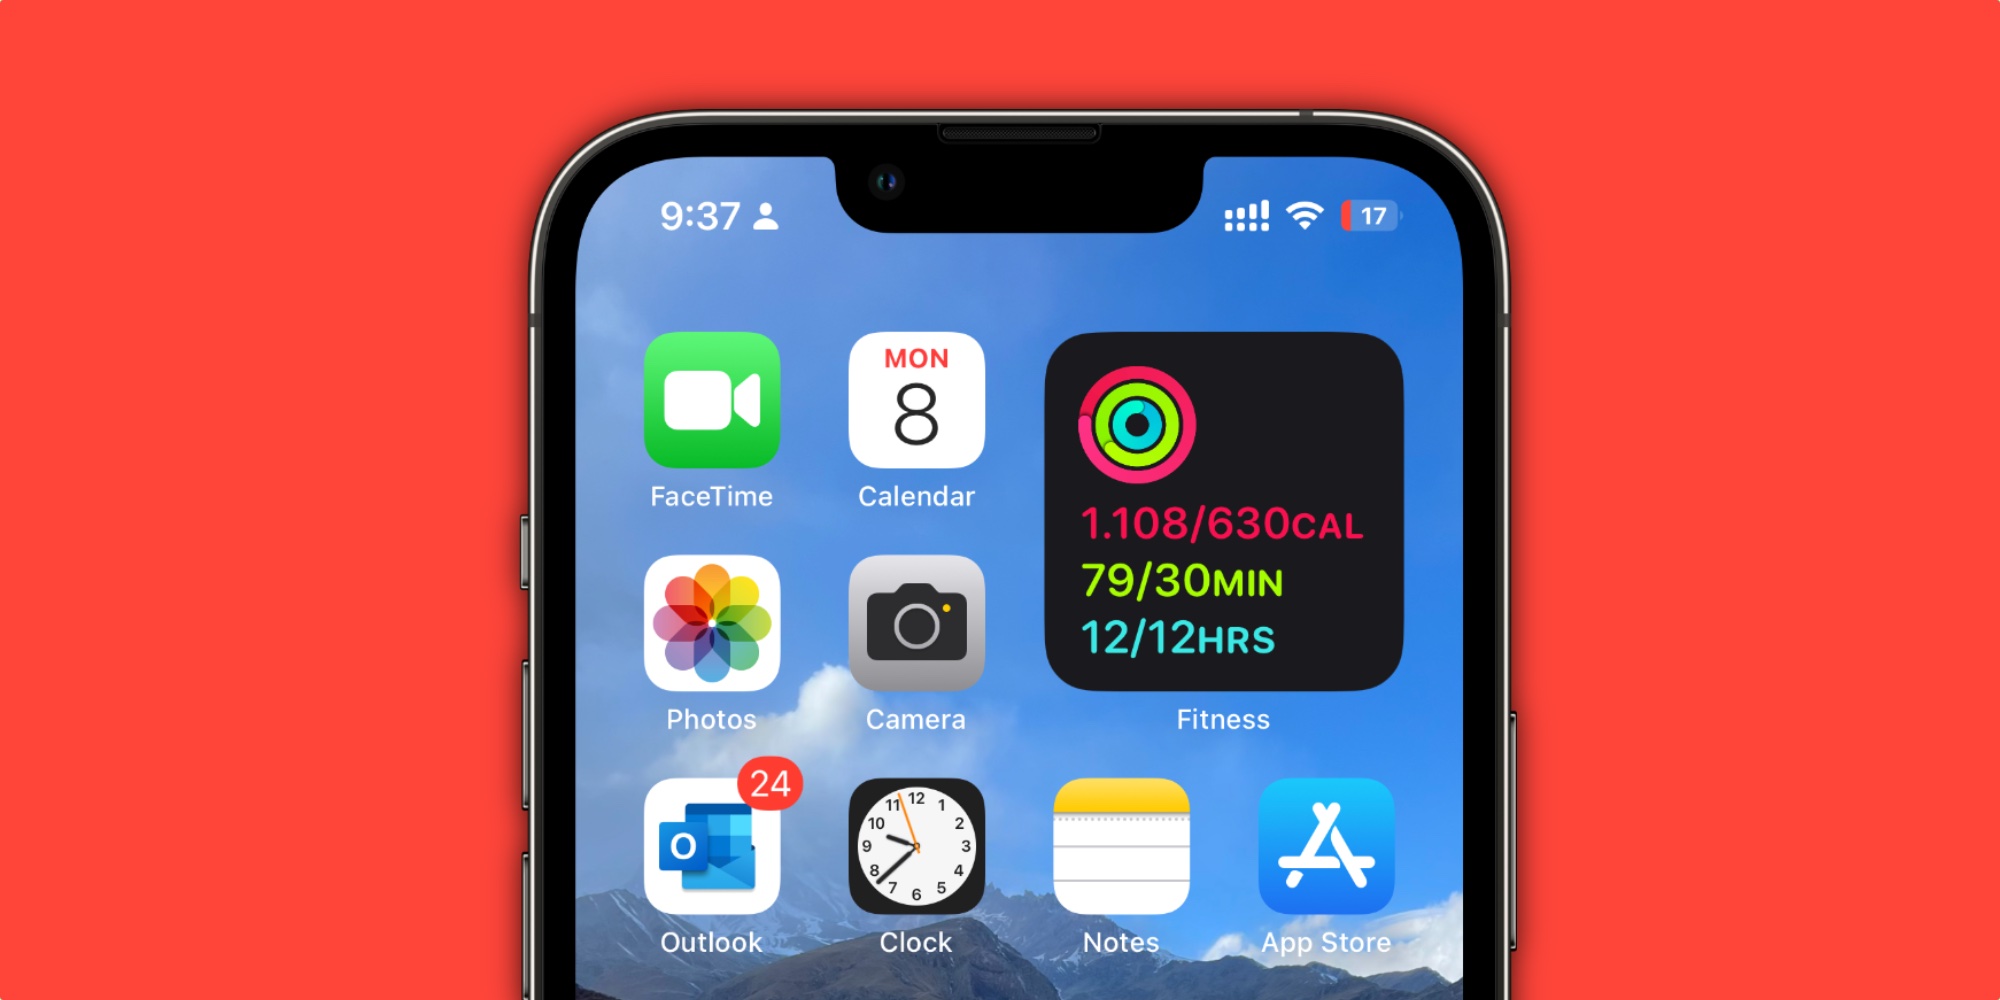 Parat statisk nå Comment: The problem with the iOS 16 battery percentage icon